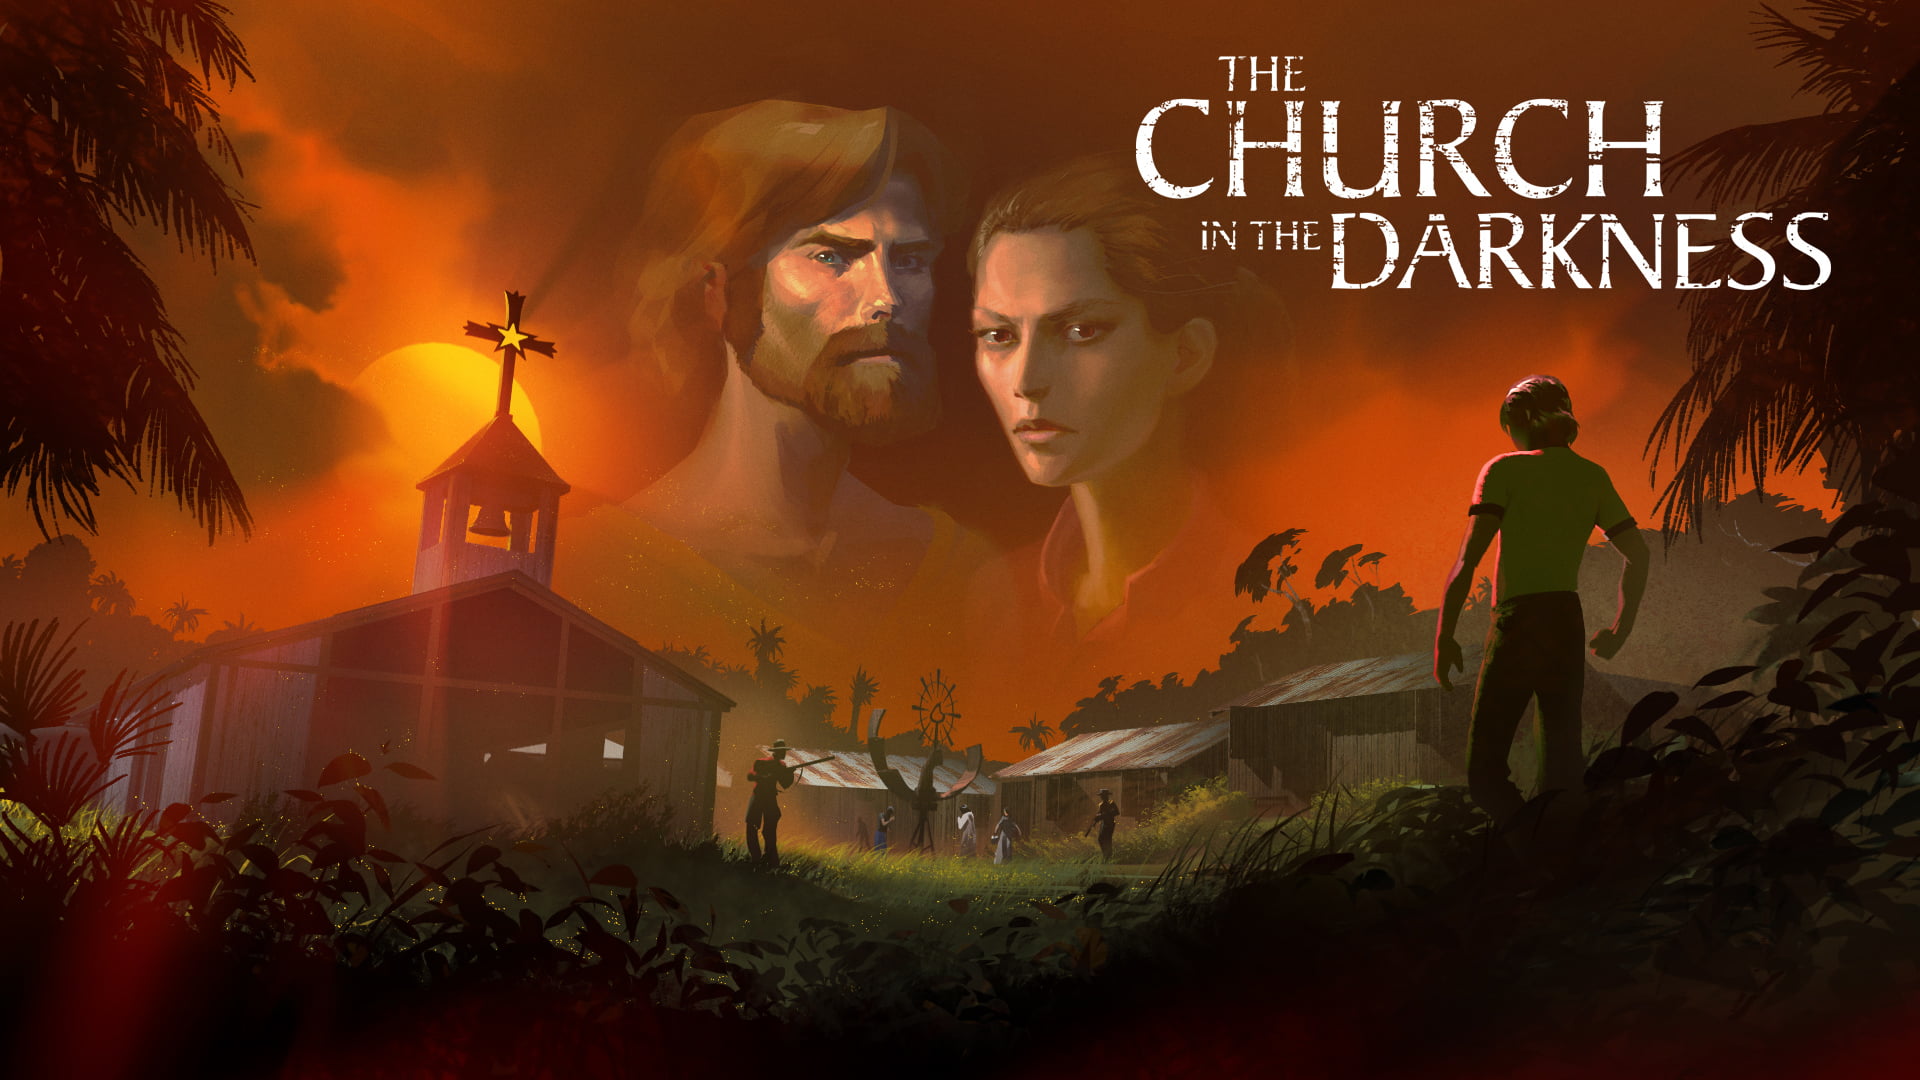 The church in the darkness - review | the church in the darkness | pixelhive | the church in the darkness pixelhive